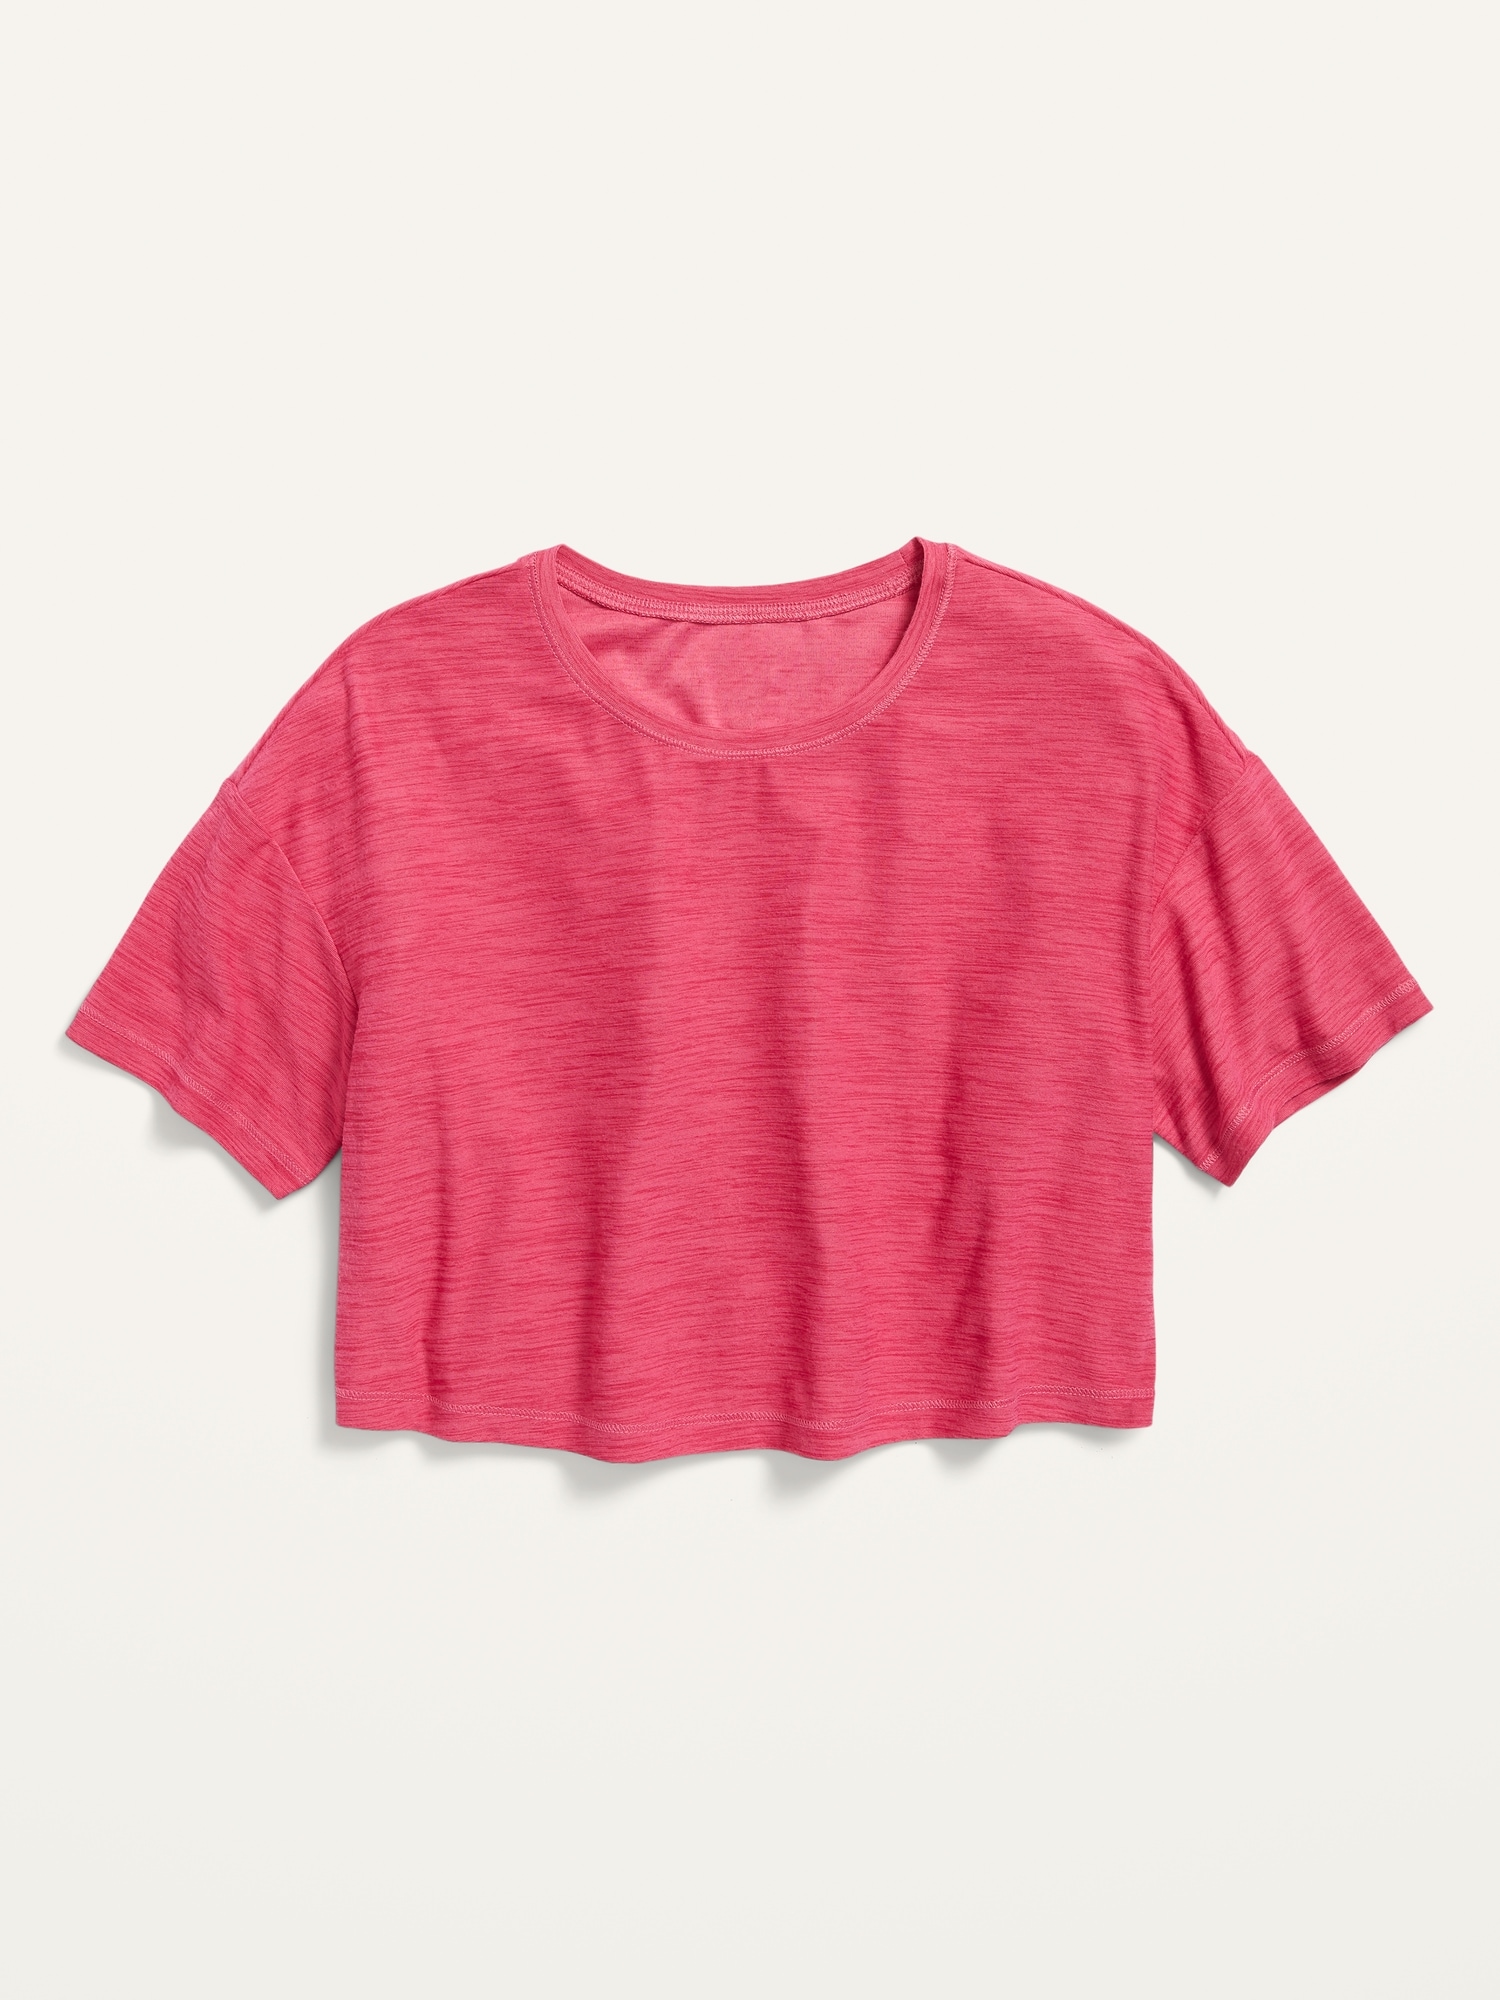 Breathe ON Cropped Tee for Girls